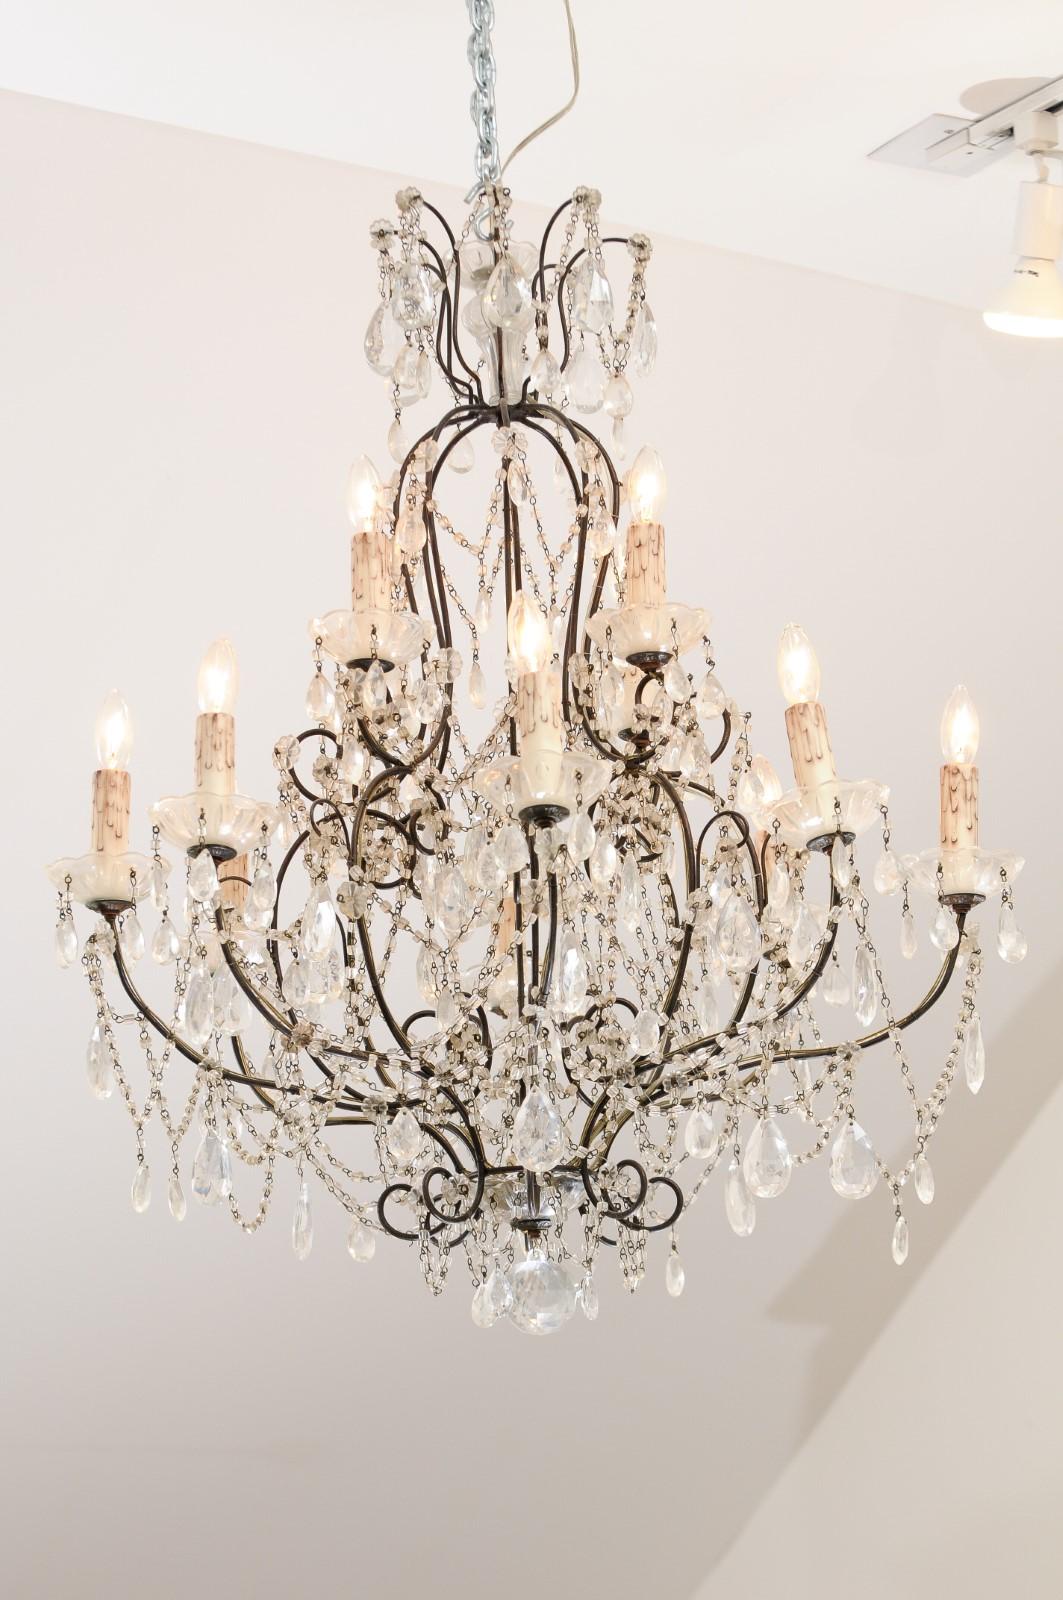 Italian 19th Century 10-Light Crystal and Iron Chandelier with Scrolling Arms For Sale 8